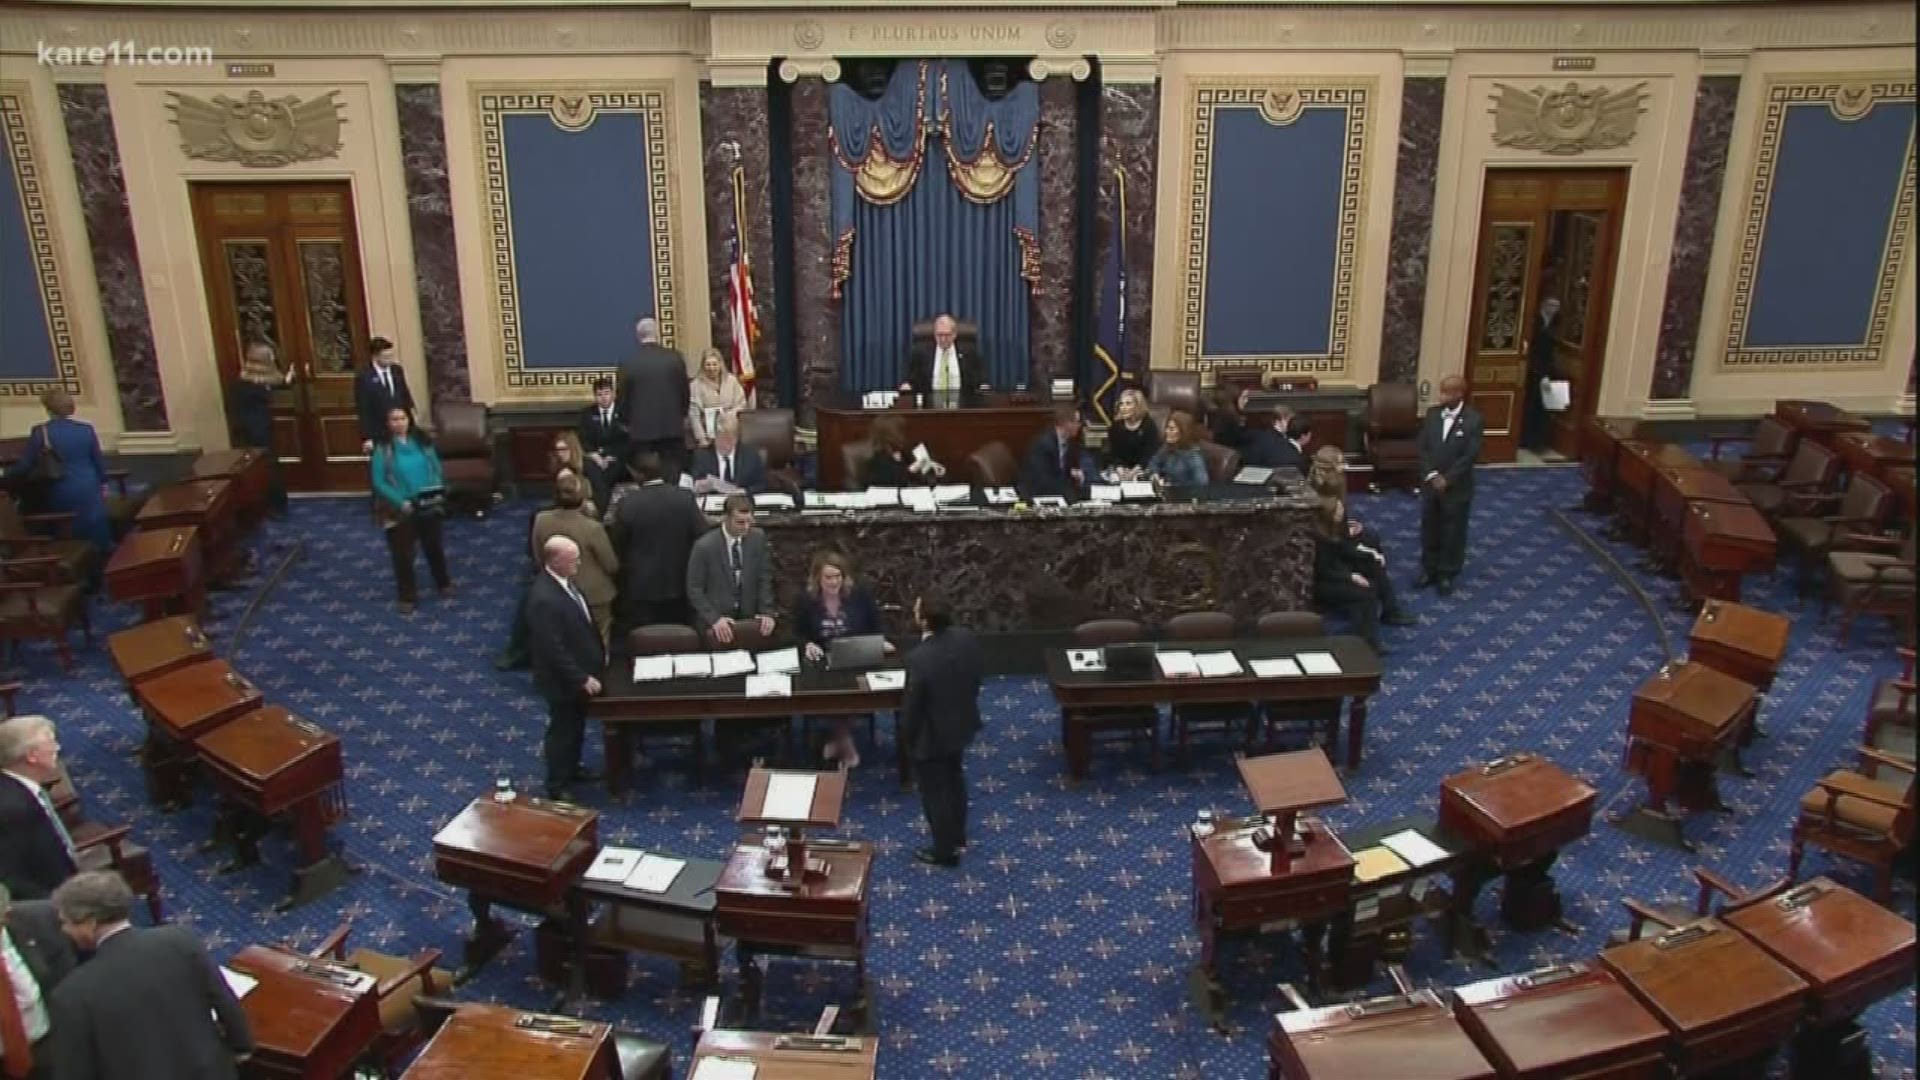 The House has voted 228-193 to send the articles of impeachment to the Senate for a trial.